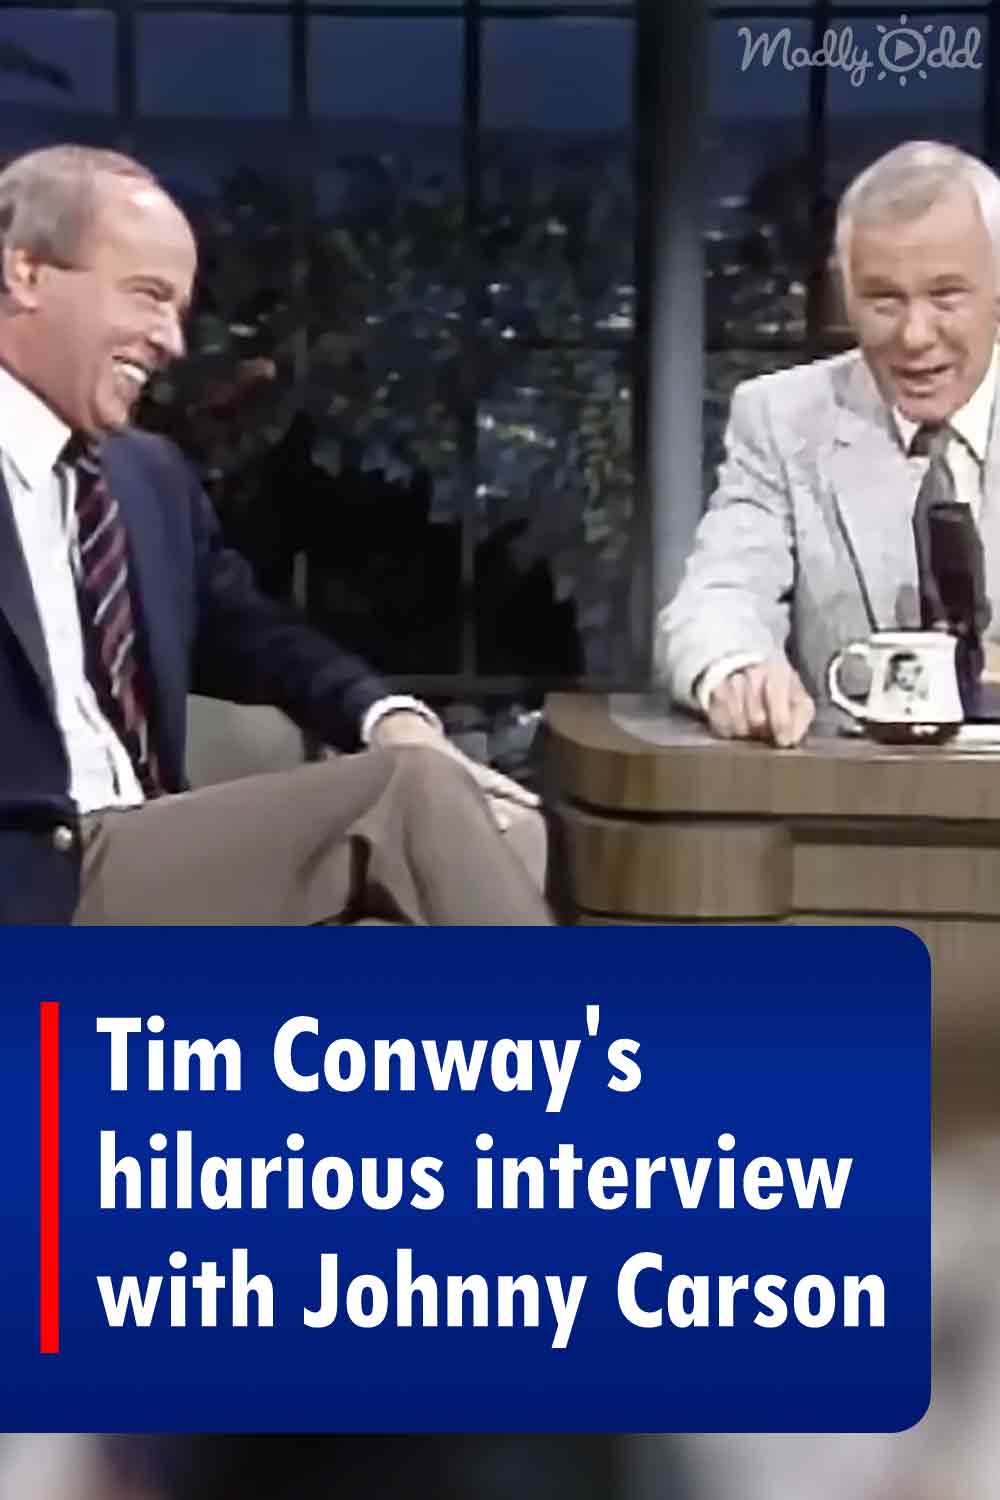 Tim Conway’s hilarious interview with Johnny Carson - Madly Odd!